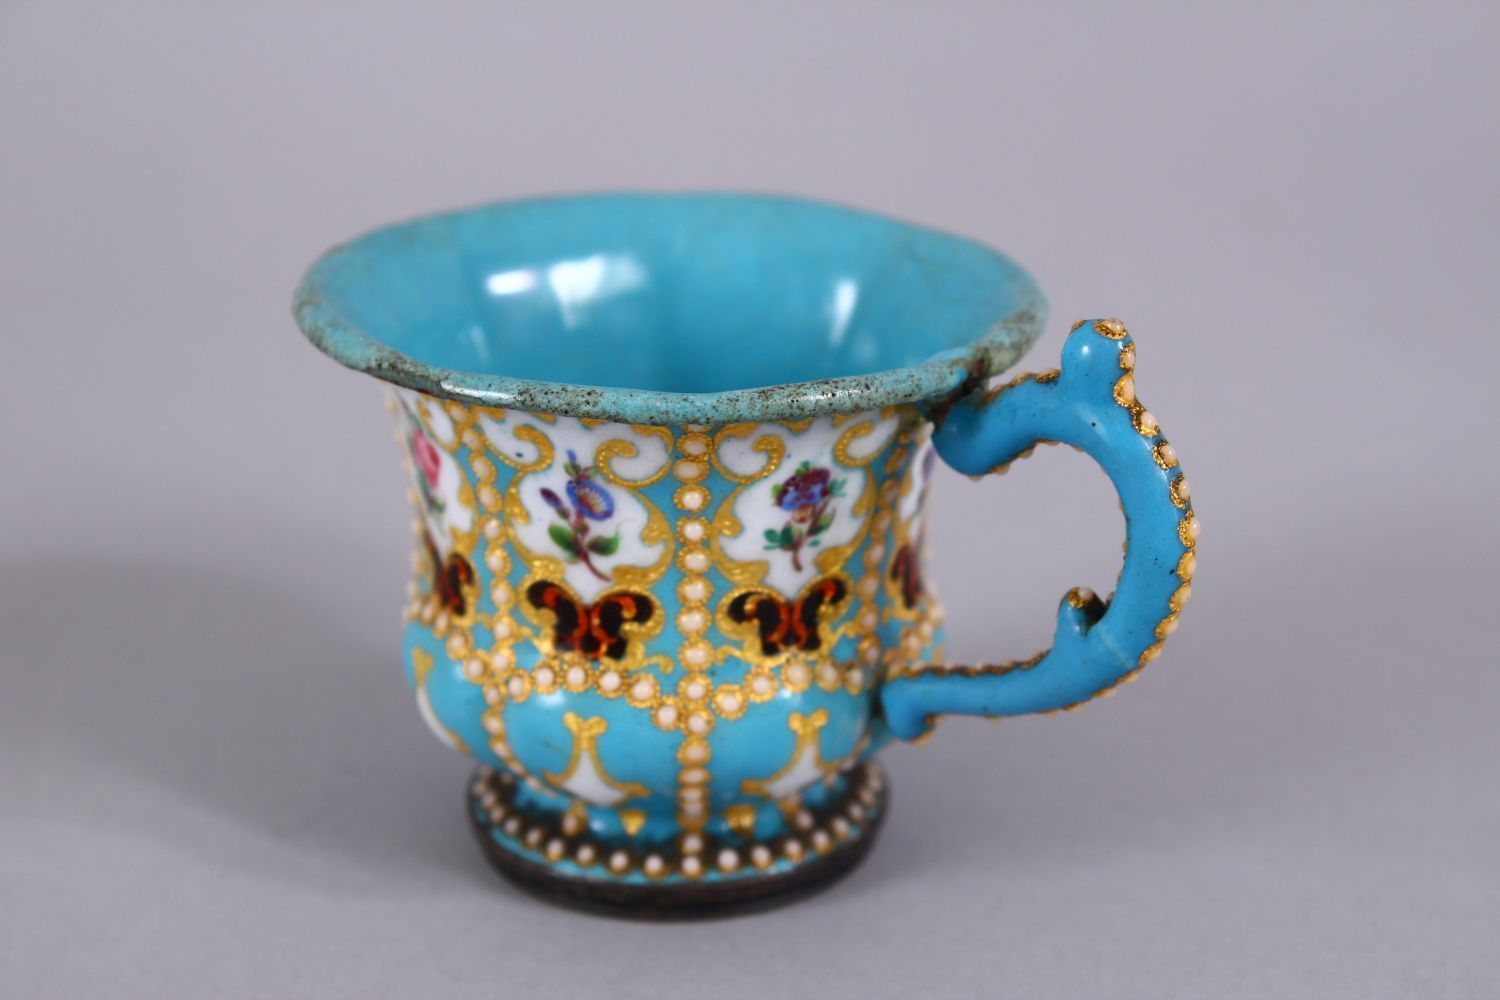 A FINE 19TH CENTURY OTTOMAN OR OTTOMAN MARKET ENAMELLED CUP AND SAUCER, with finely painted panels - Image 3 of 8